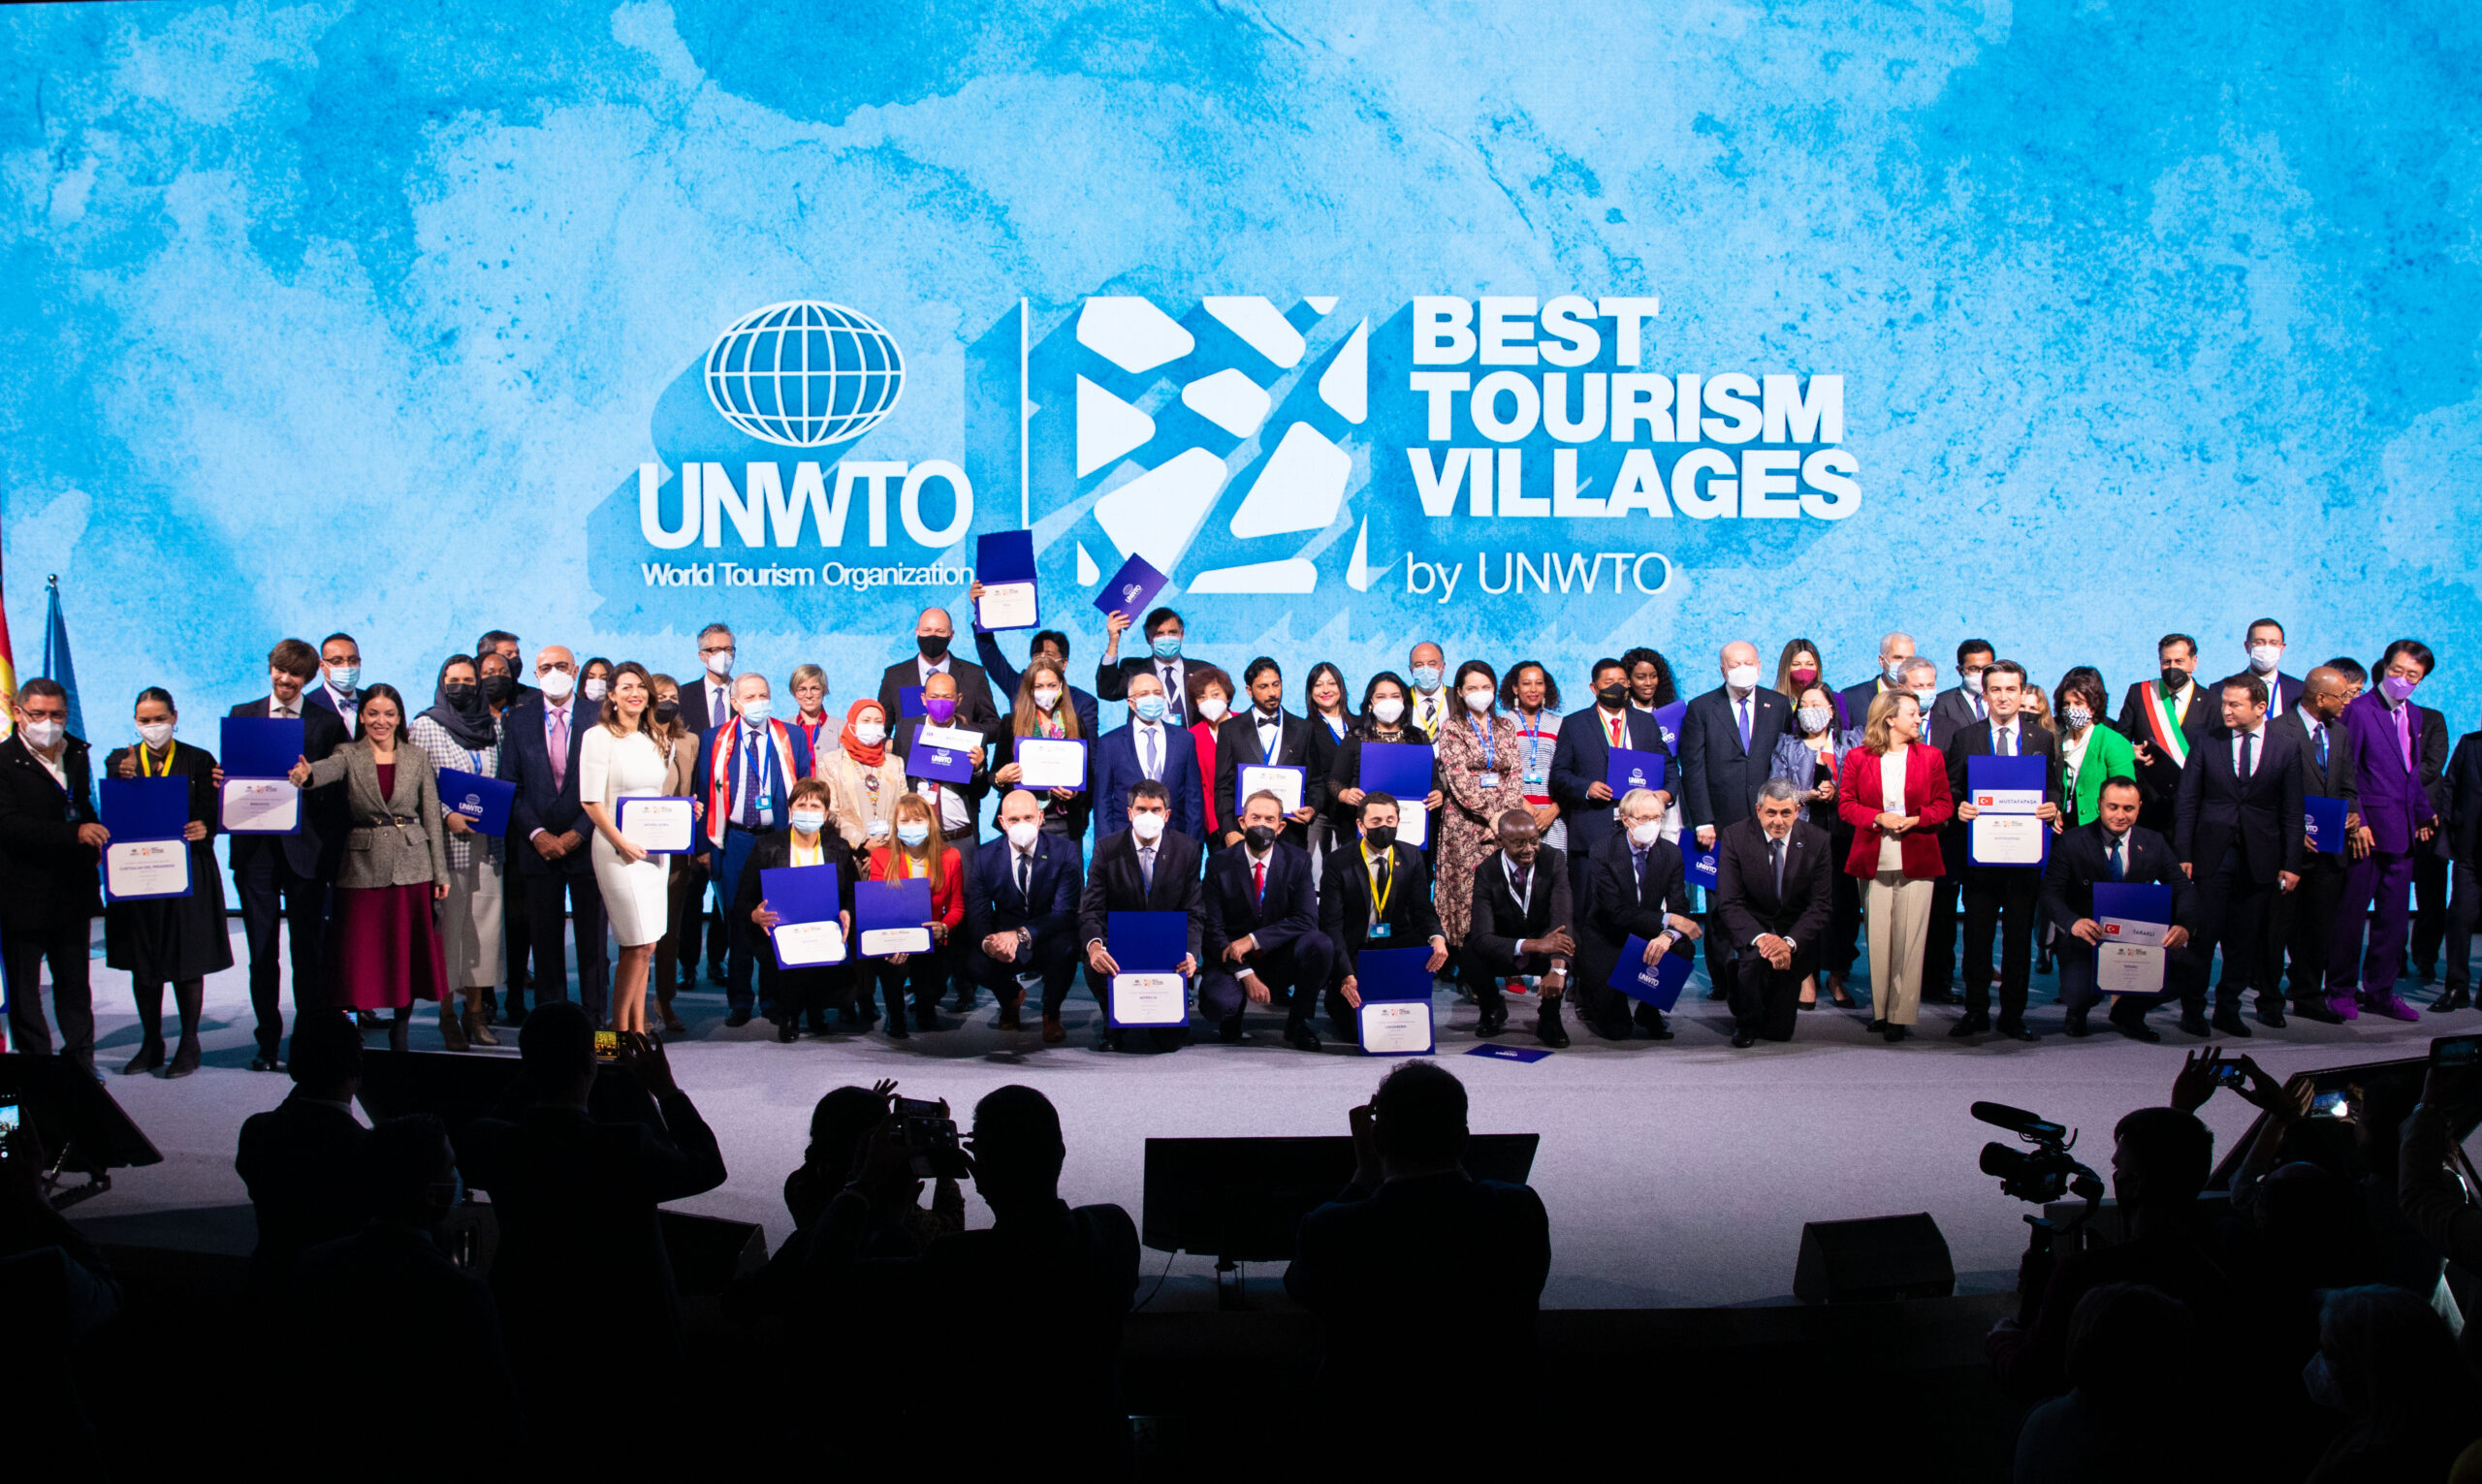 Announcement ceremony of selected Best Tourism Villages by UNWTO 2021 – 24th session of UNWTO General Assembly, Madrid 2 December 2021